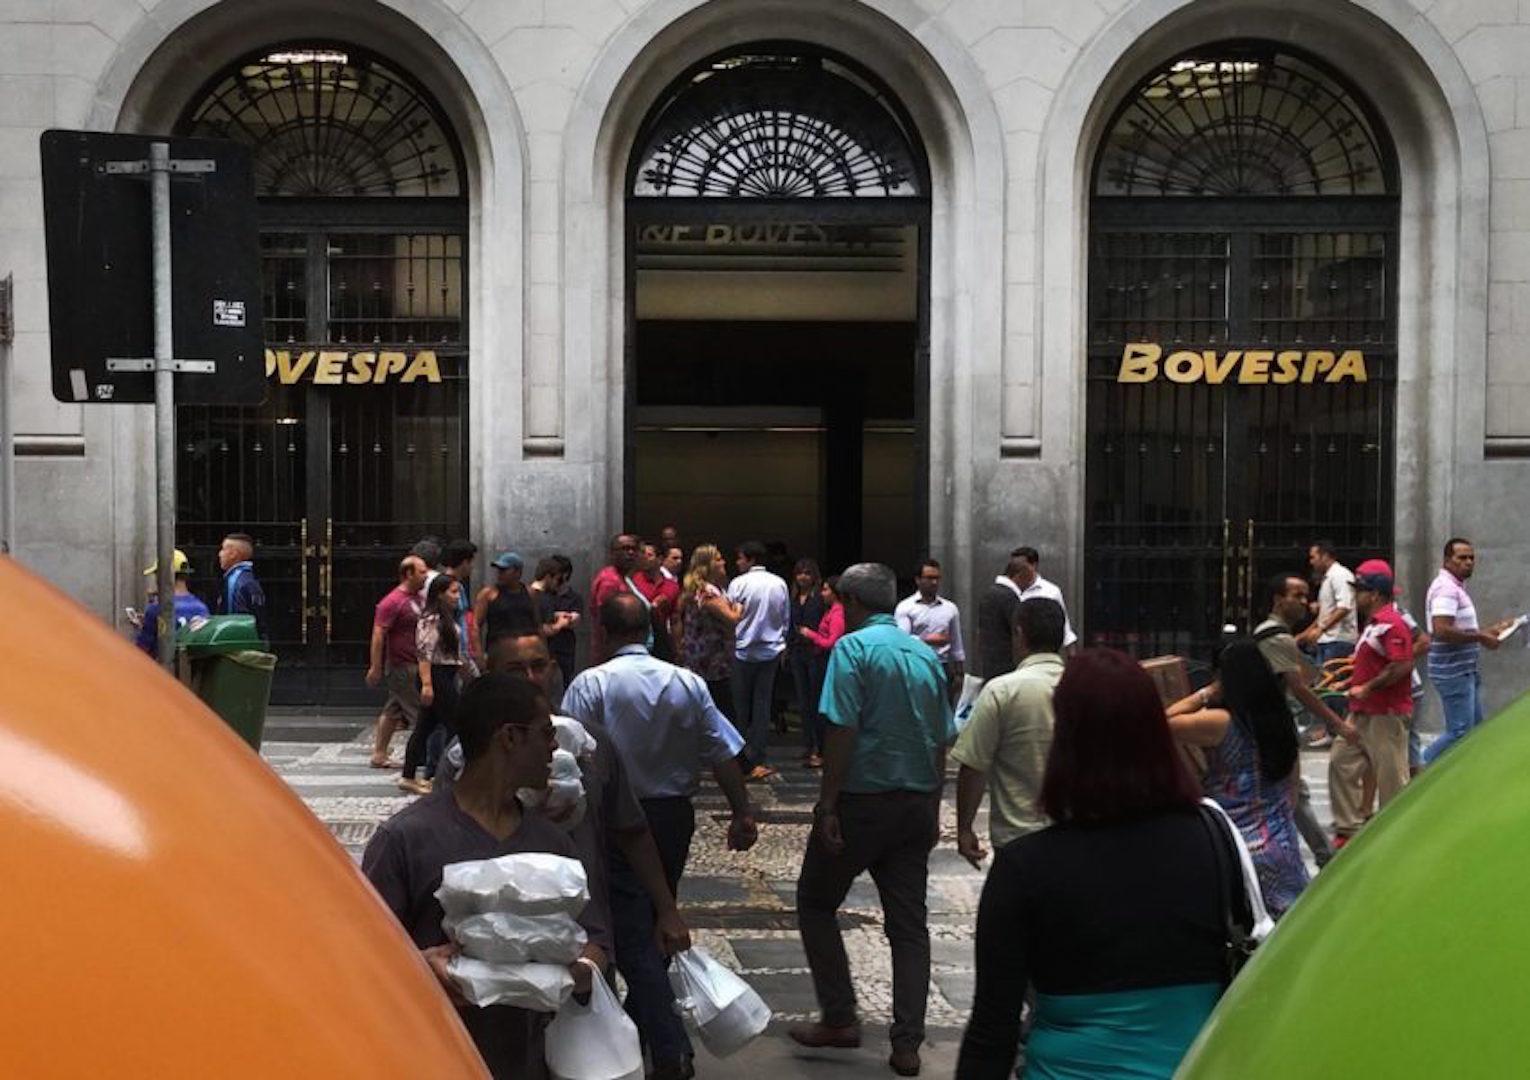 The IBOVESPA closed up strongly on Tuesday, April 7th, but drifted away from the highs while Wall Street zeroed out gains at the end of the trading session.